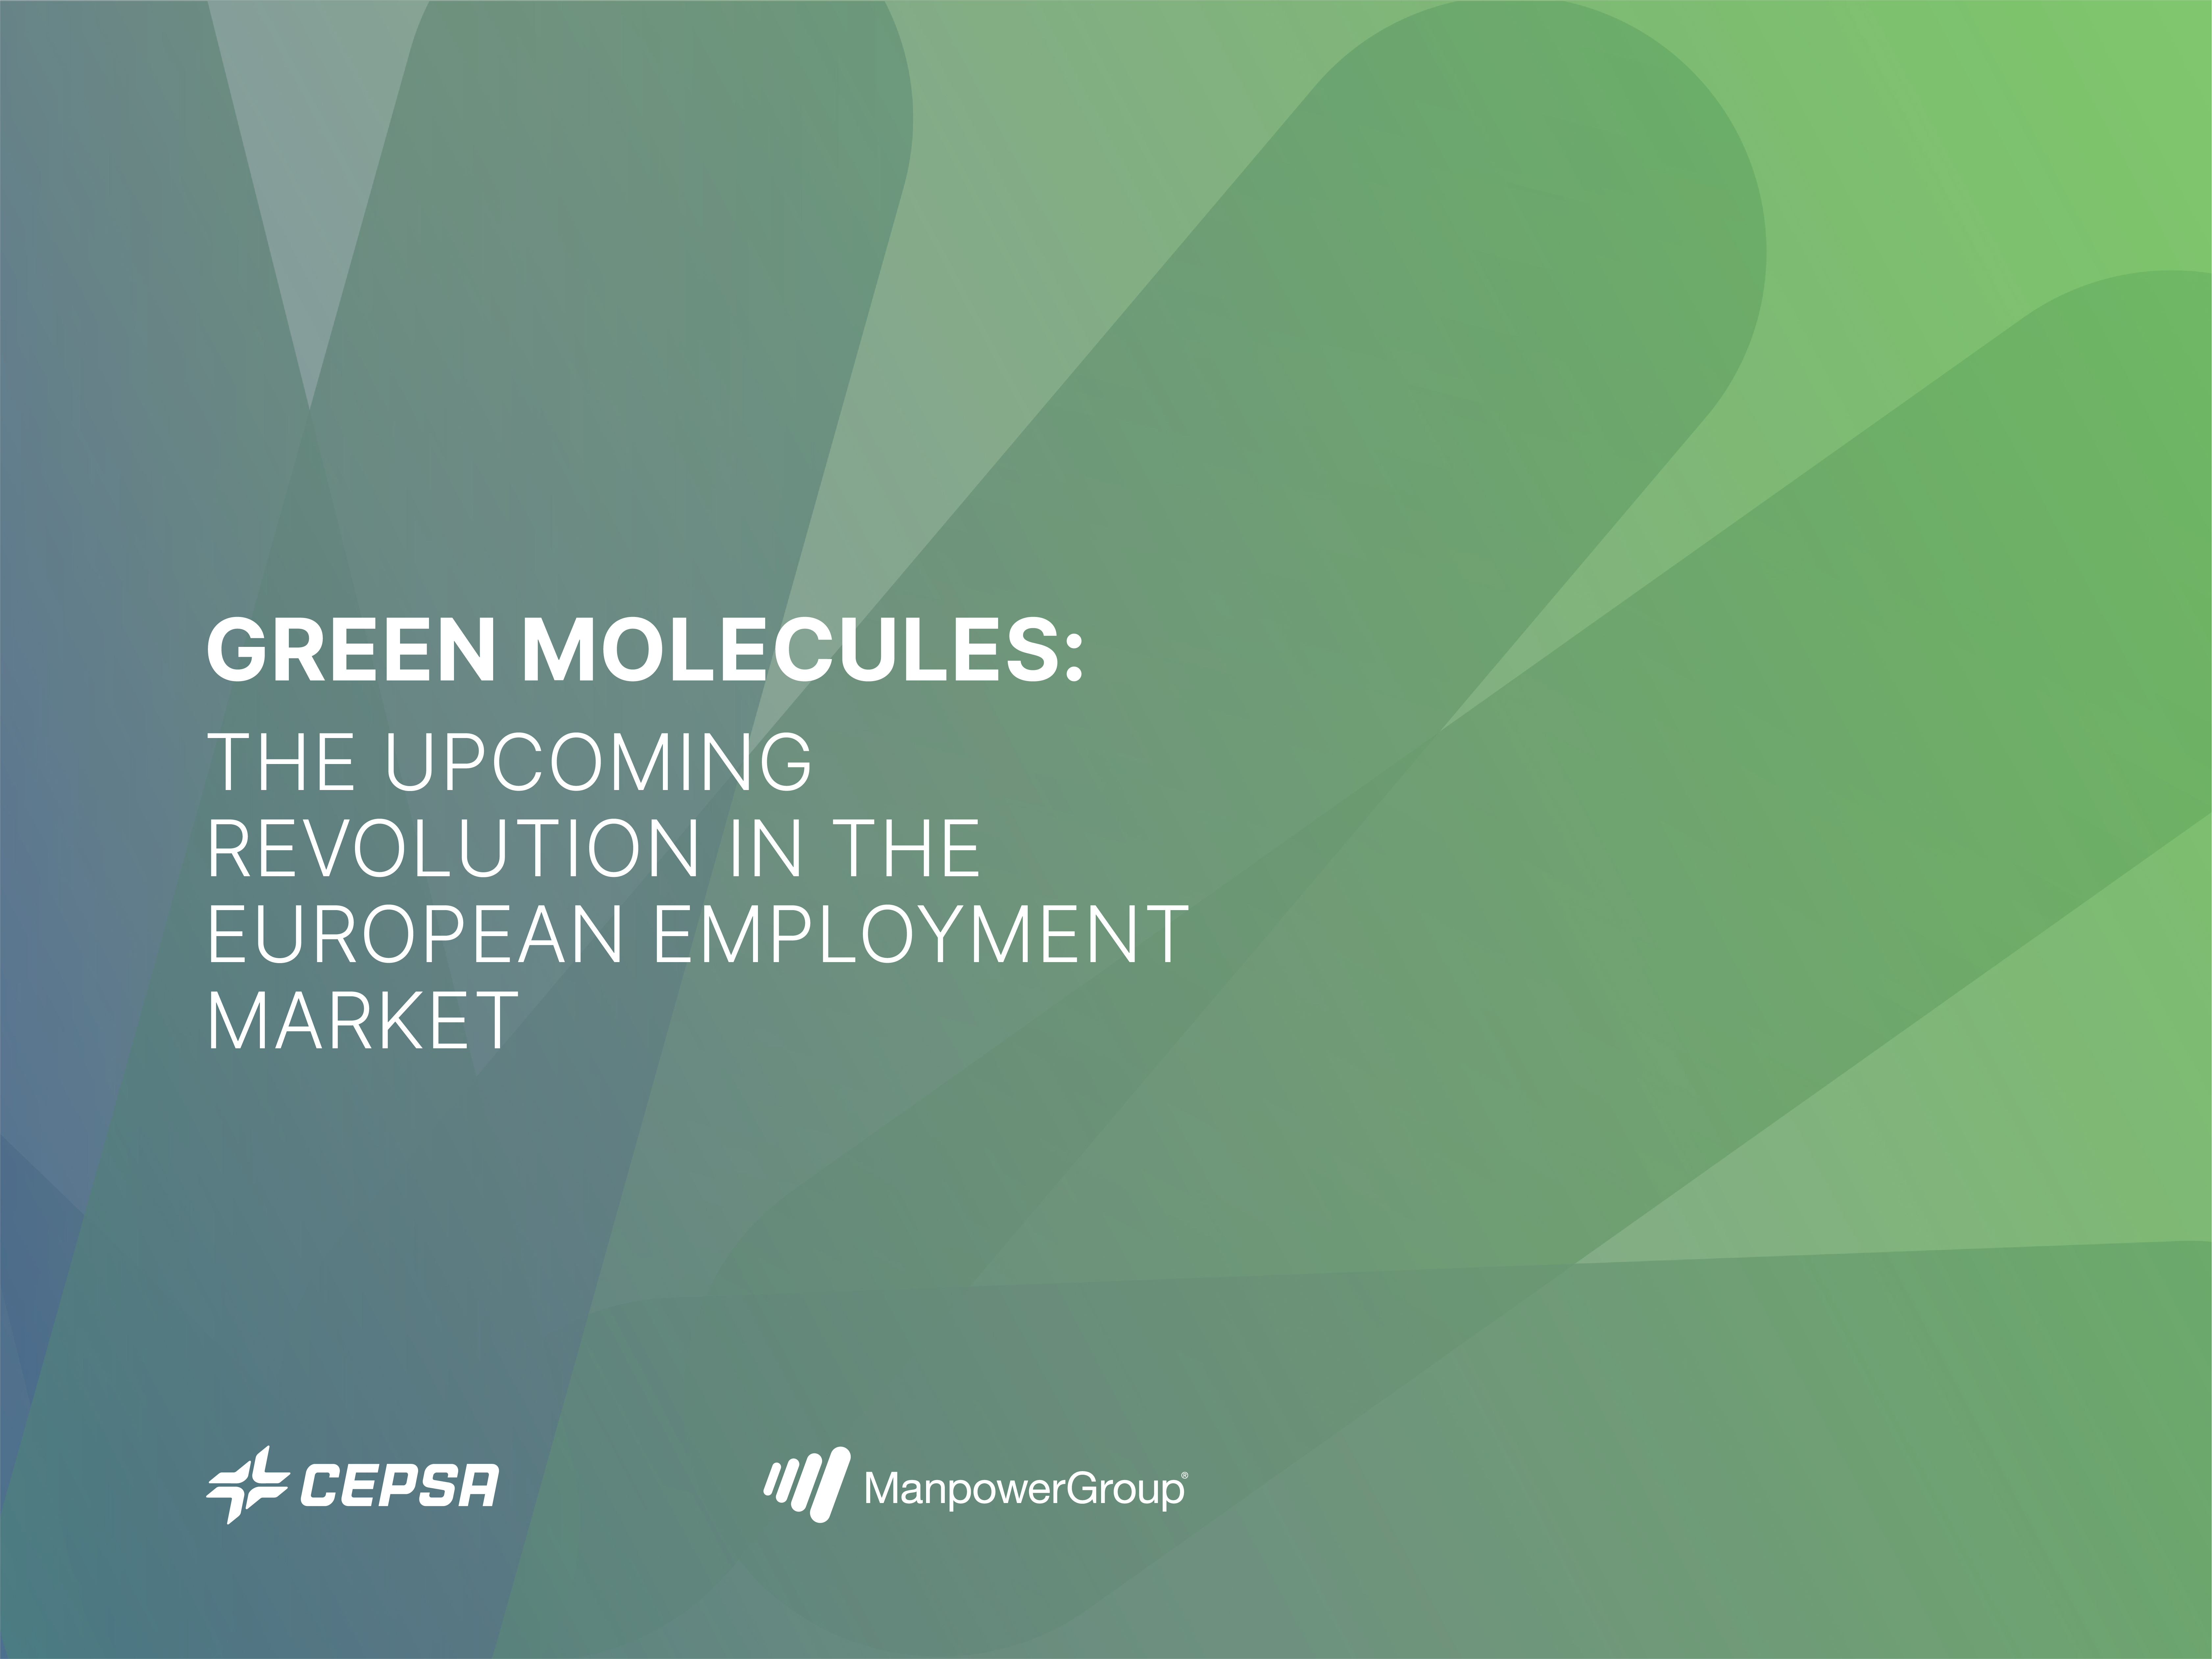 Discover how green hydrogen and biofuels could create 1.7 million jobs across Europe and boost GDP by 145 billion euros by 2040